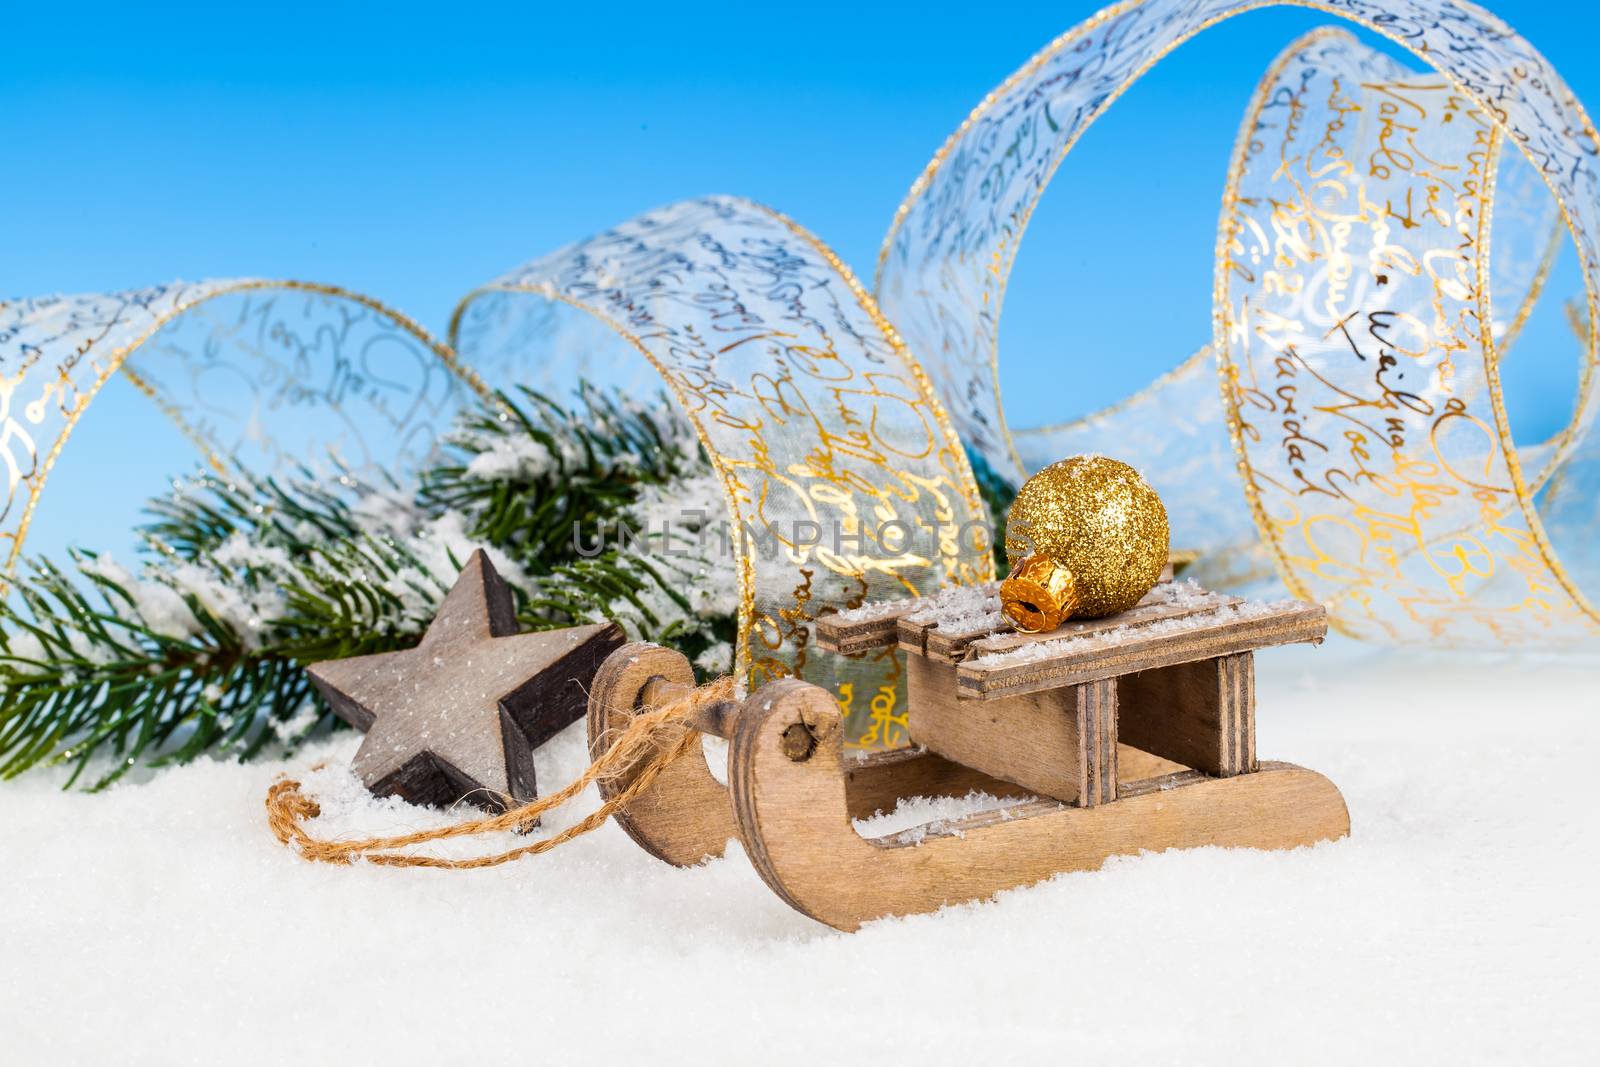 Christmas decoration over snow, blue background by motorolka